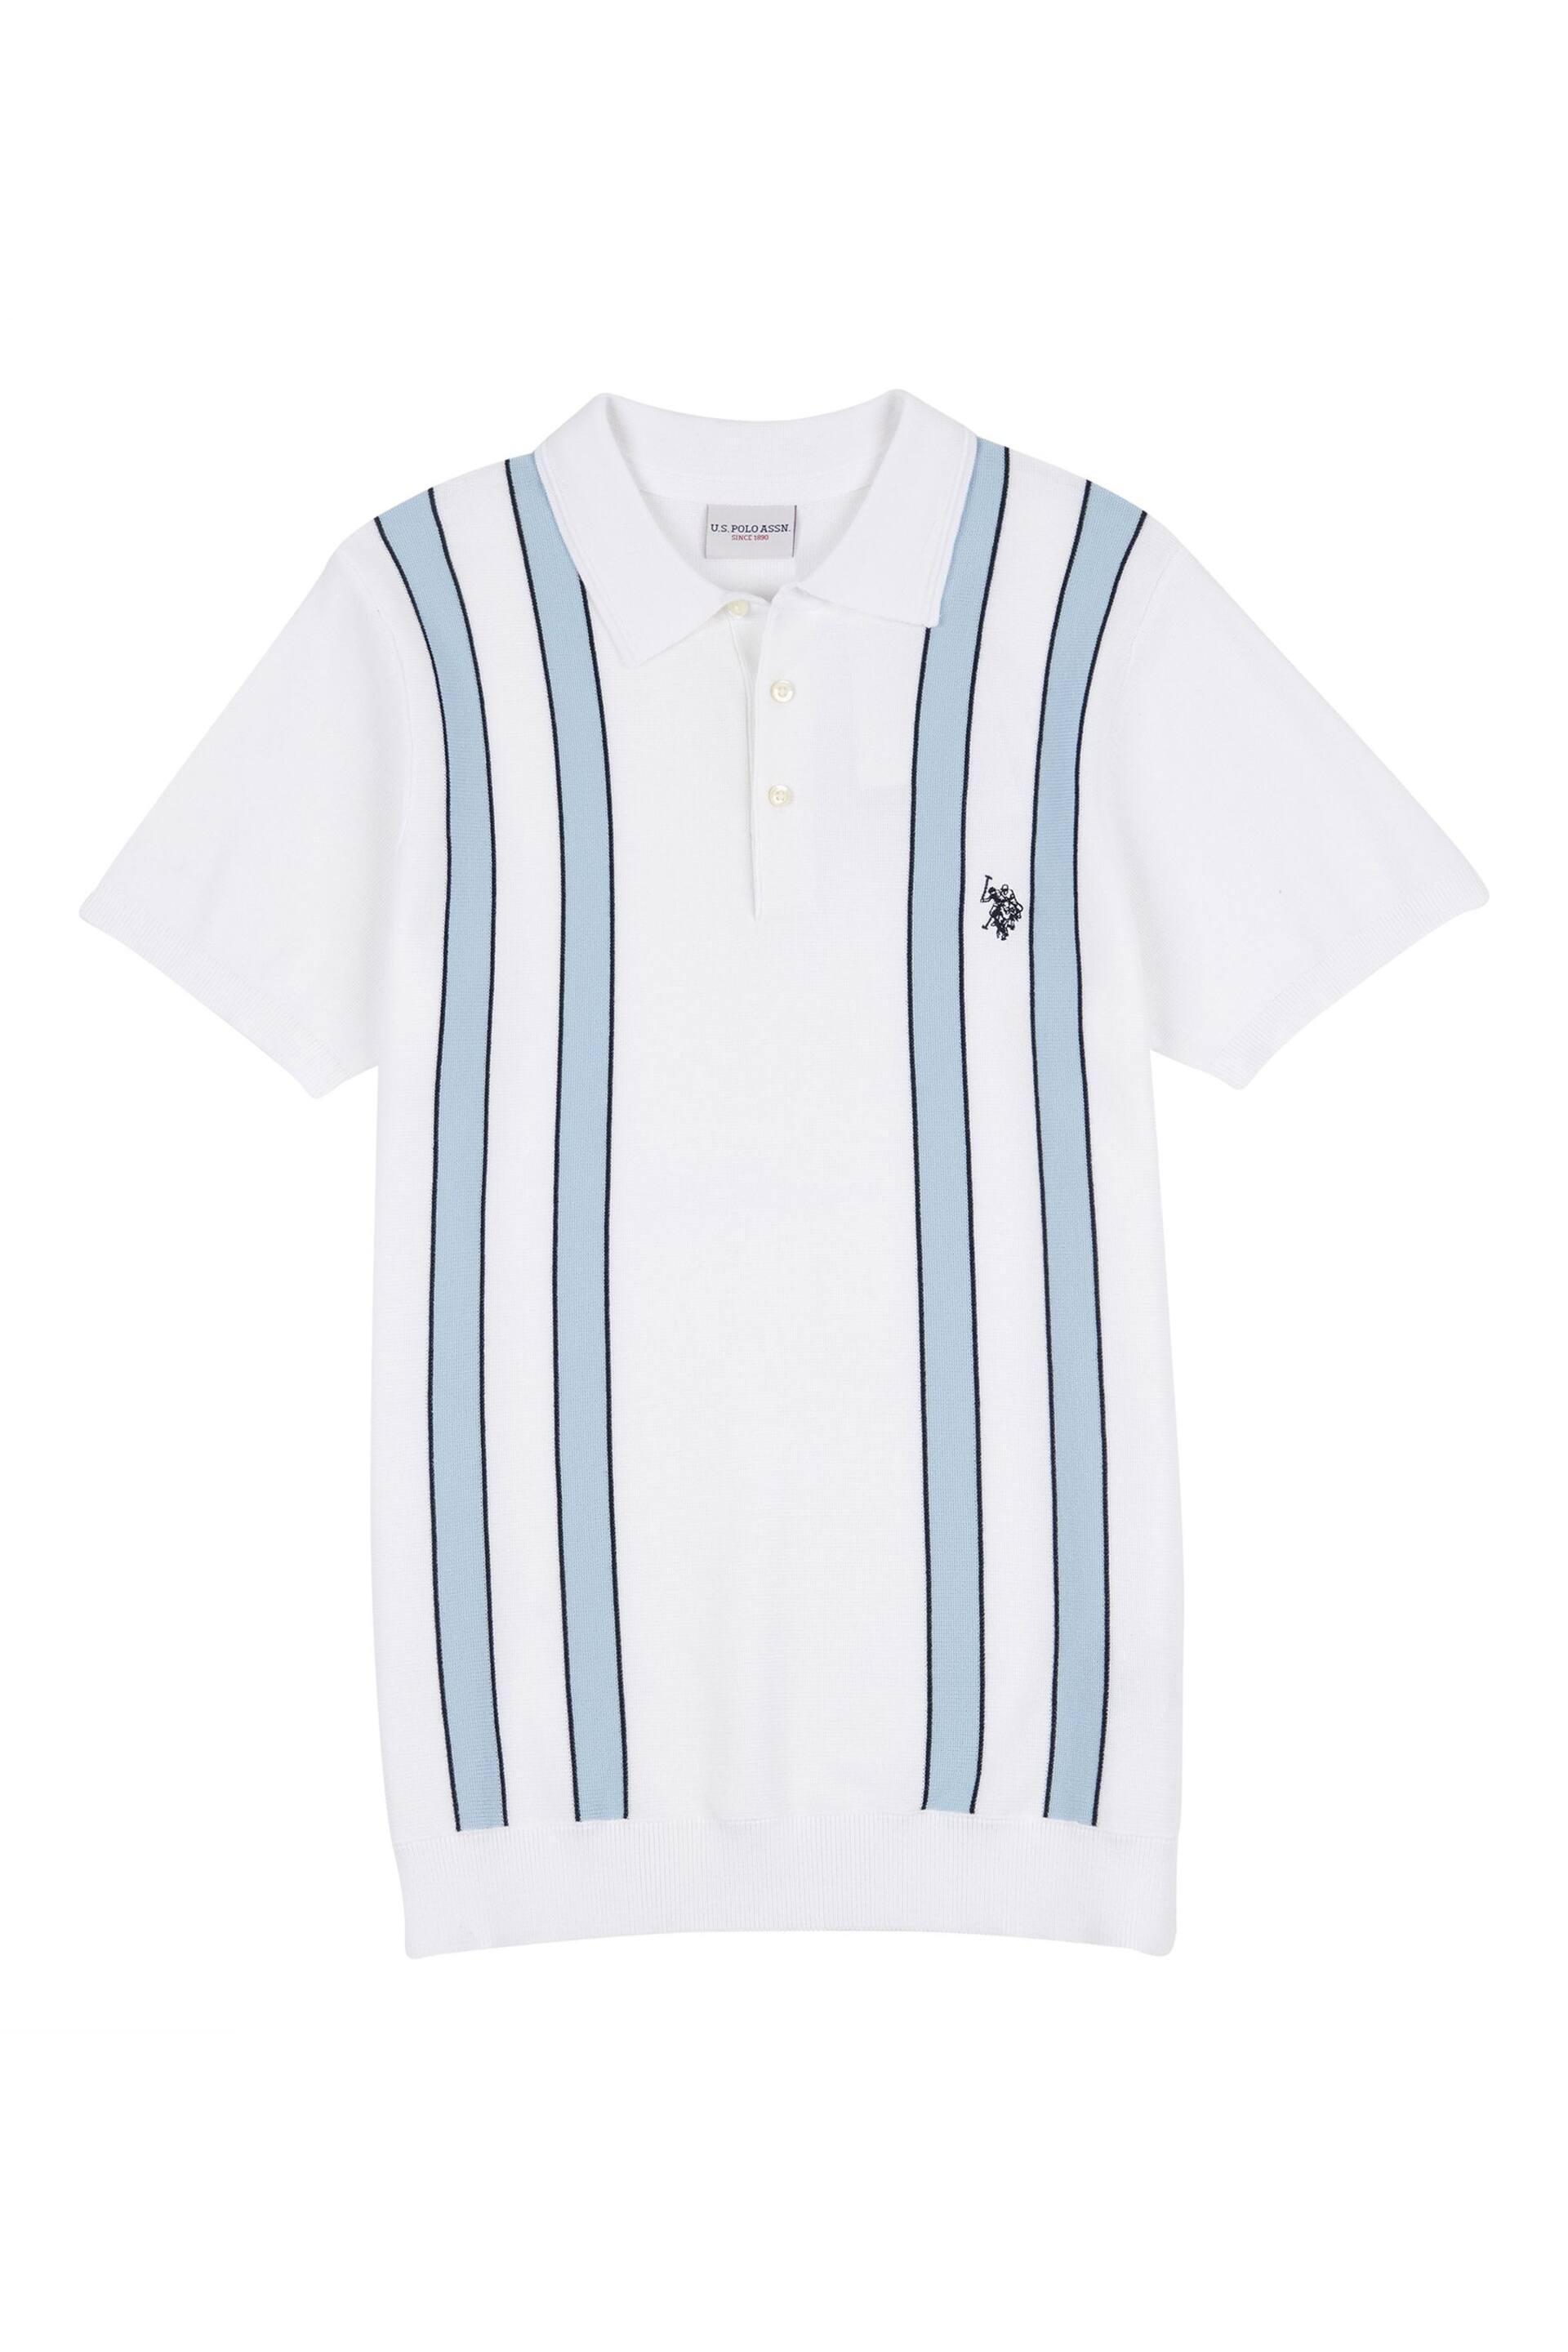 U.S. Polo Assn. Mens Regular Fit Vertical Stripe Knit White Polo Shirt - Image 5 of 7